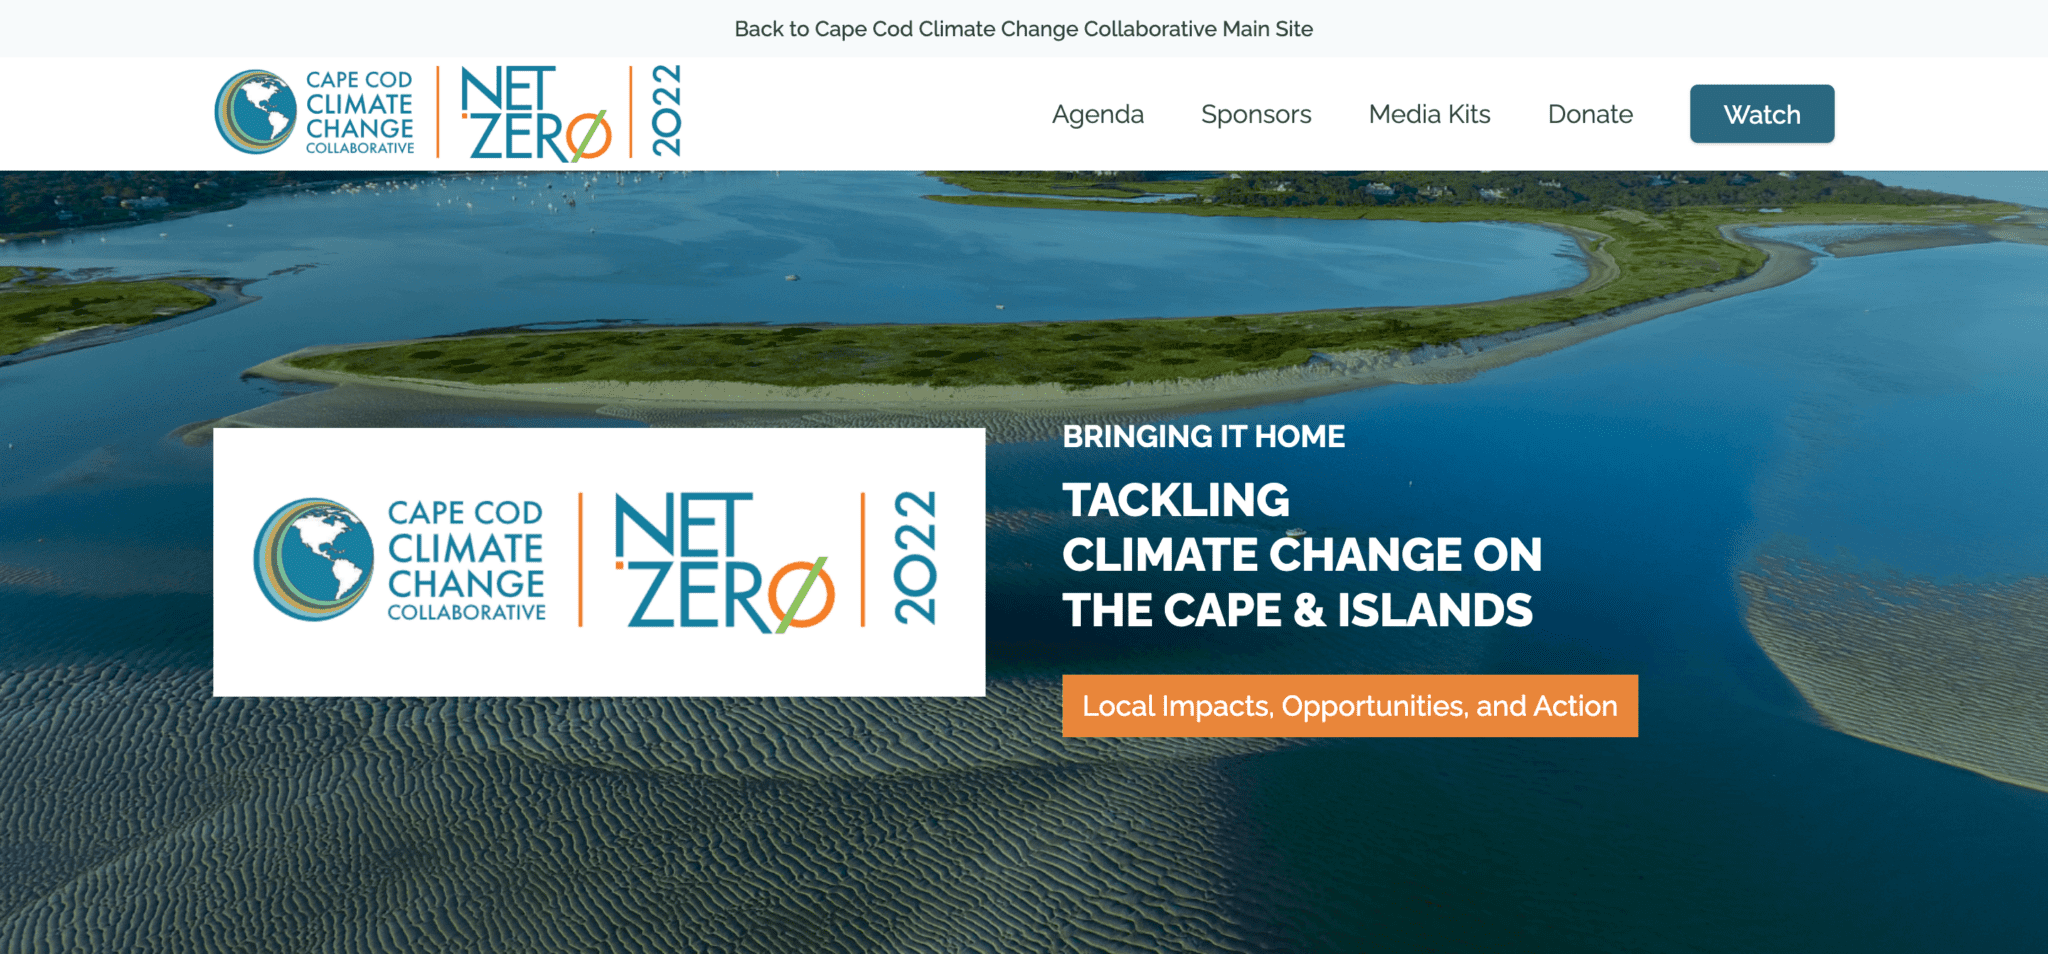 Screenshot of hero section for the Net Zero Conference on the Cape Cod Climate Collaborative website